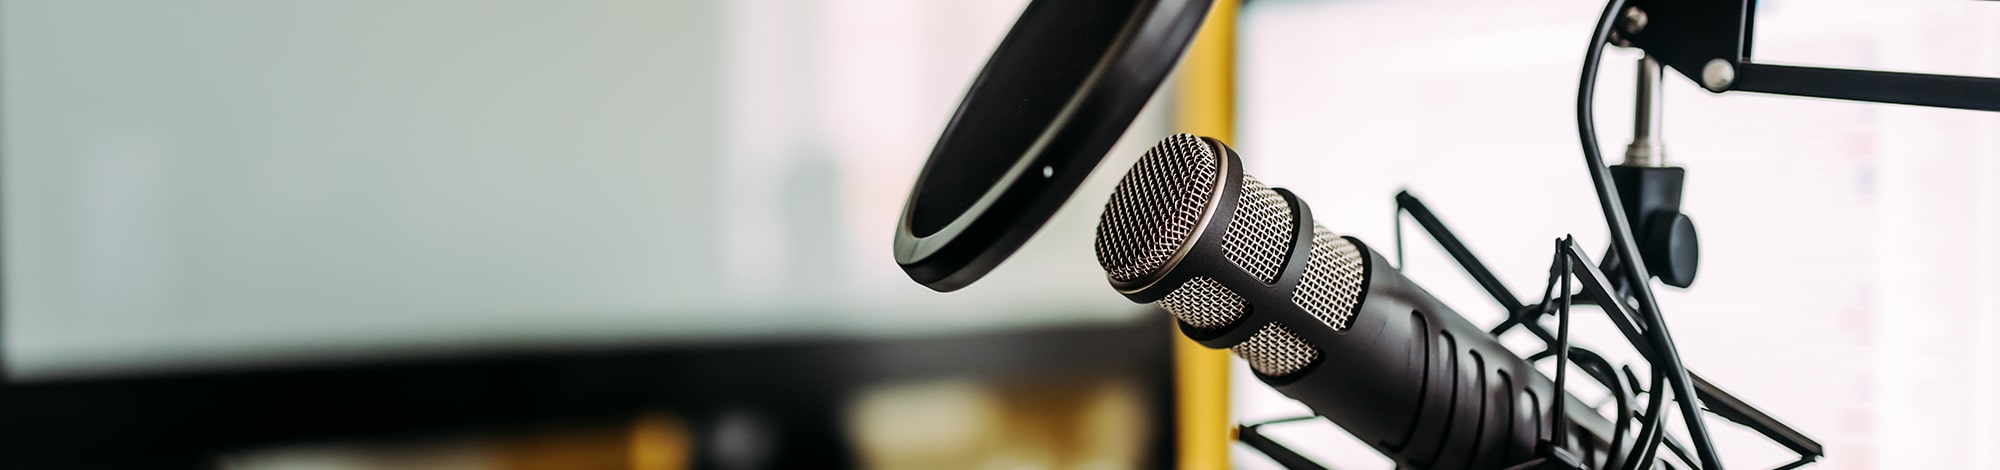 Podcast Microphone on a Stand